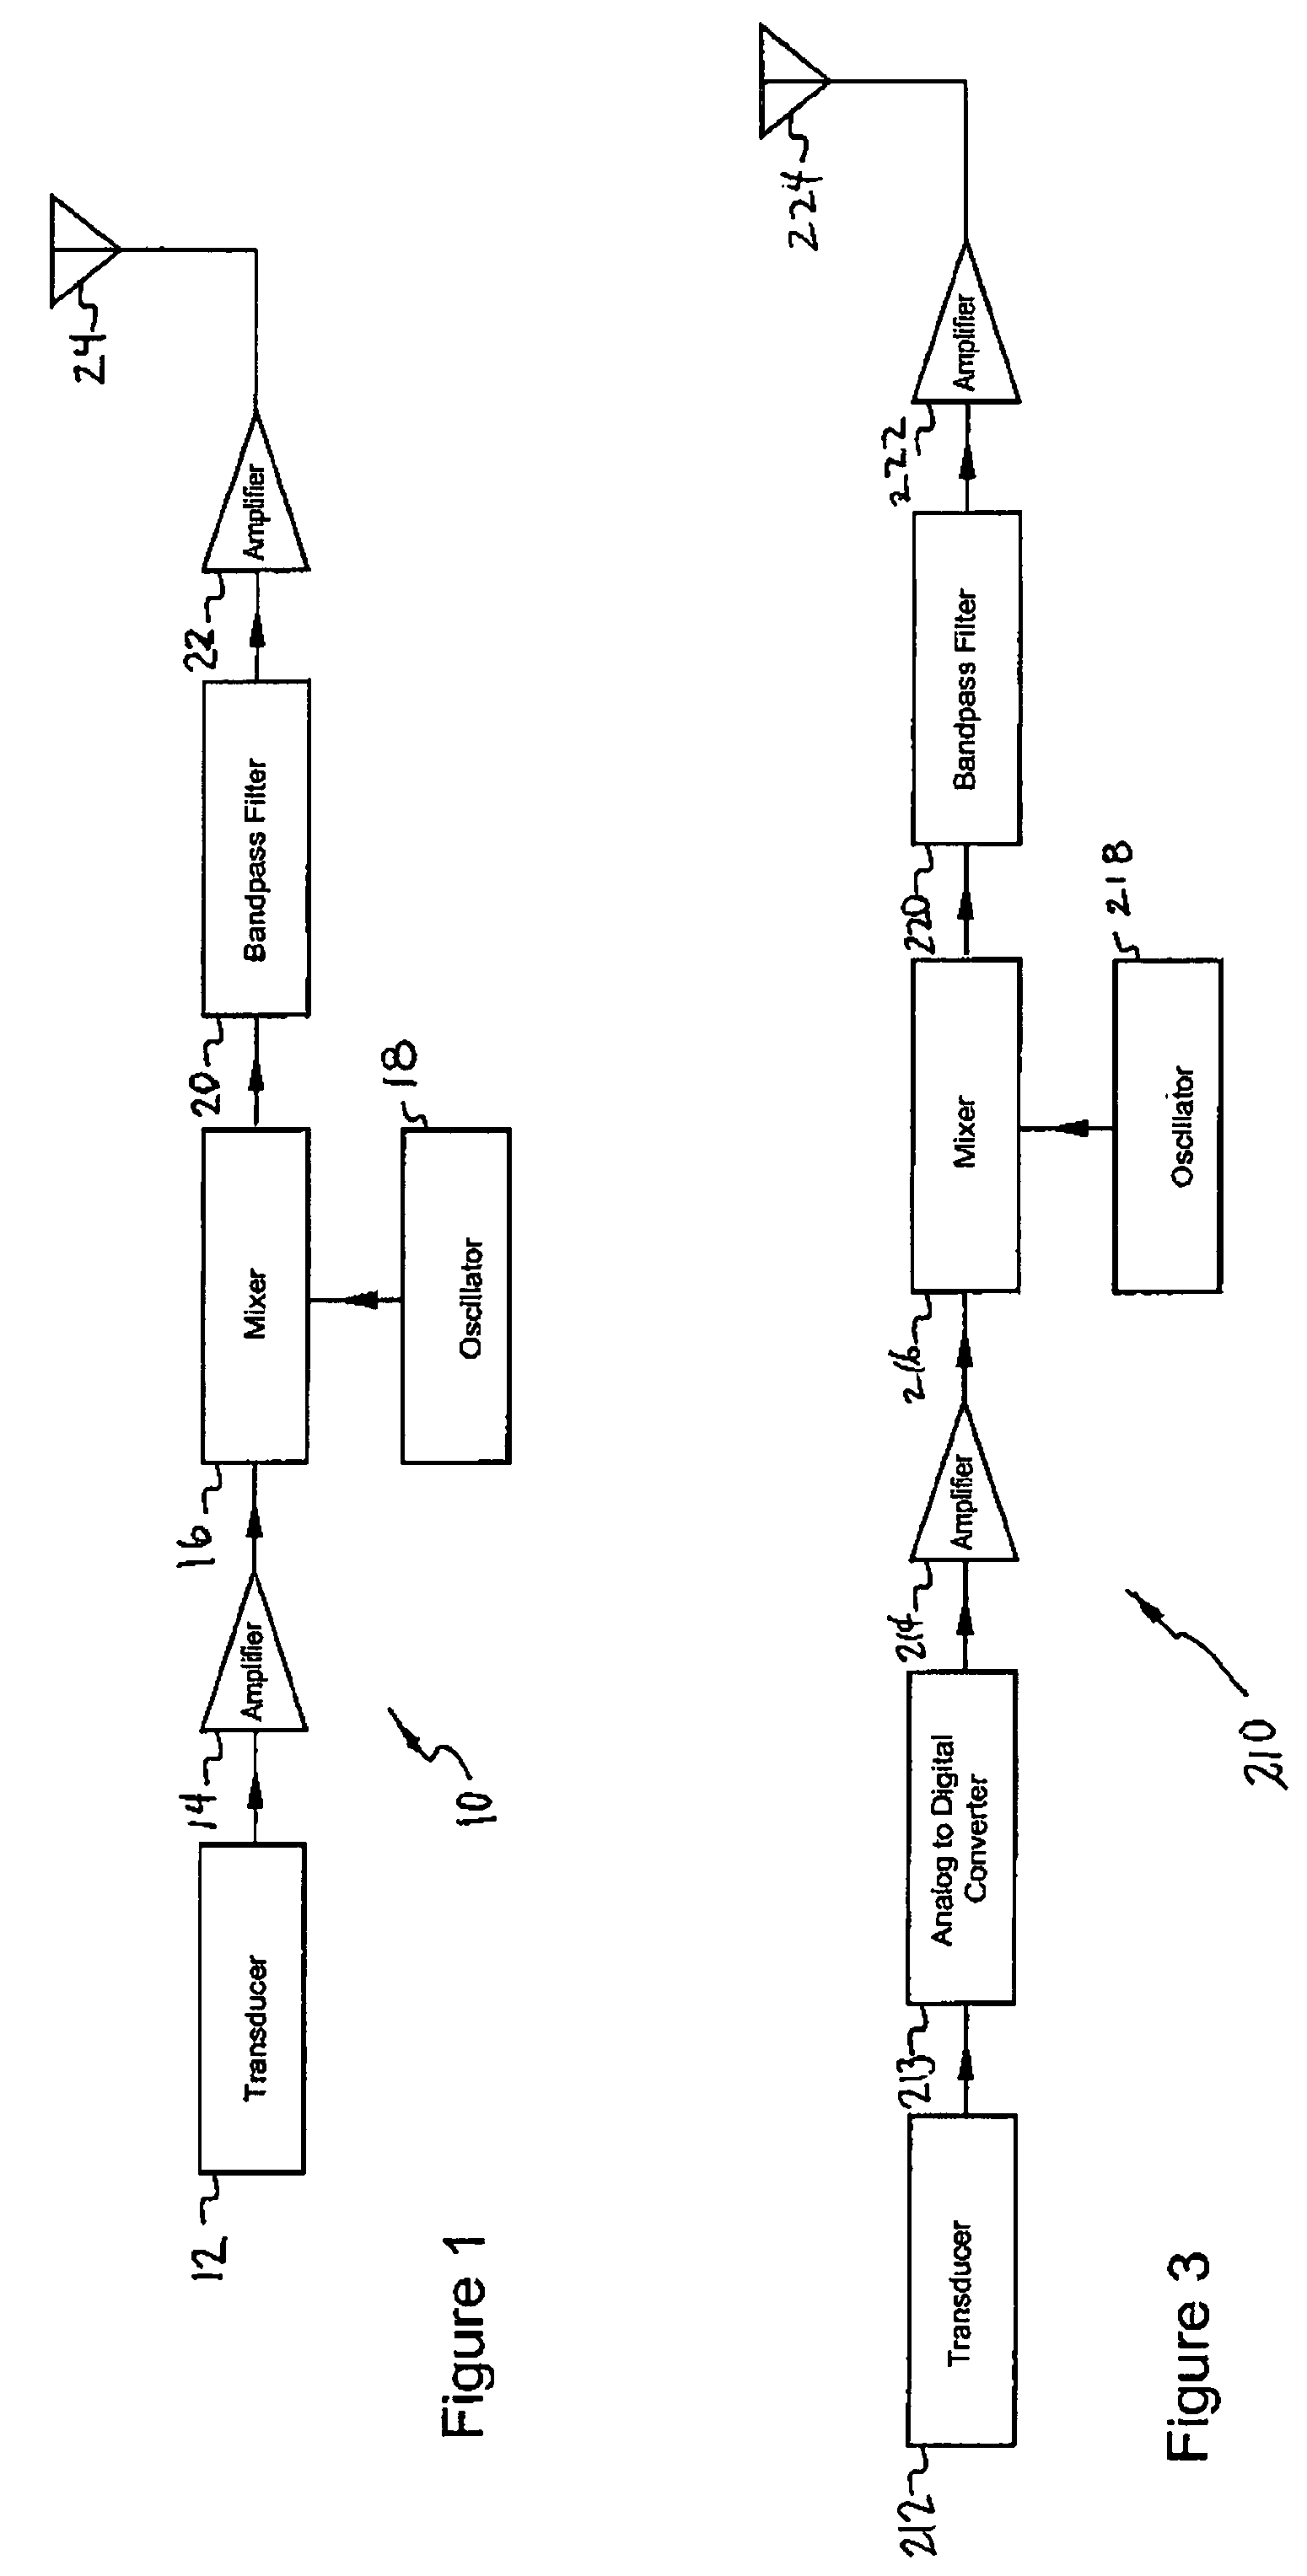 System and method for facial nerve monitoring